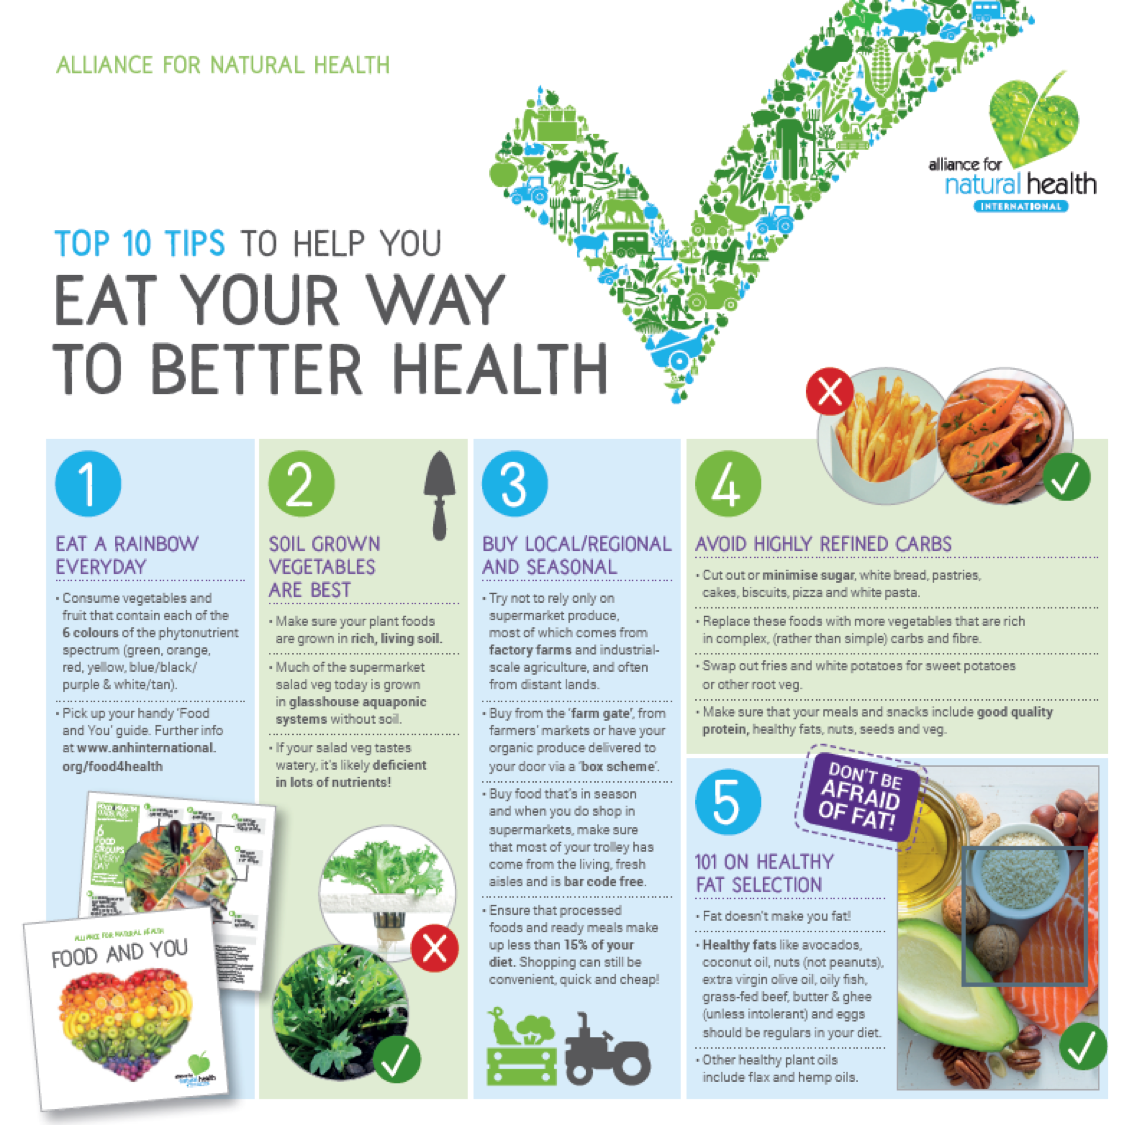 Food4Health Campaign | Alliance For Natural Health